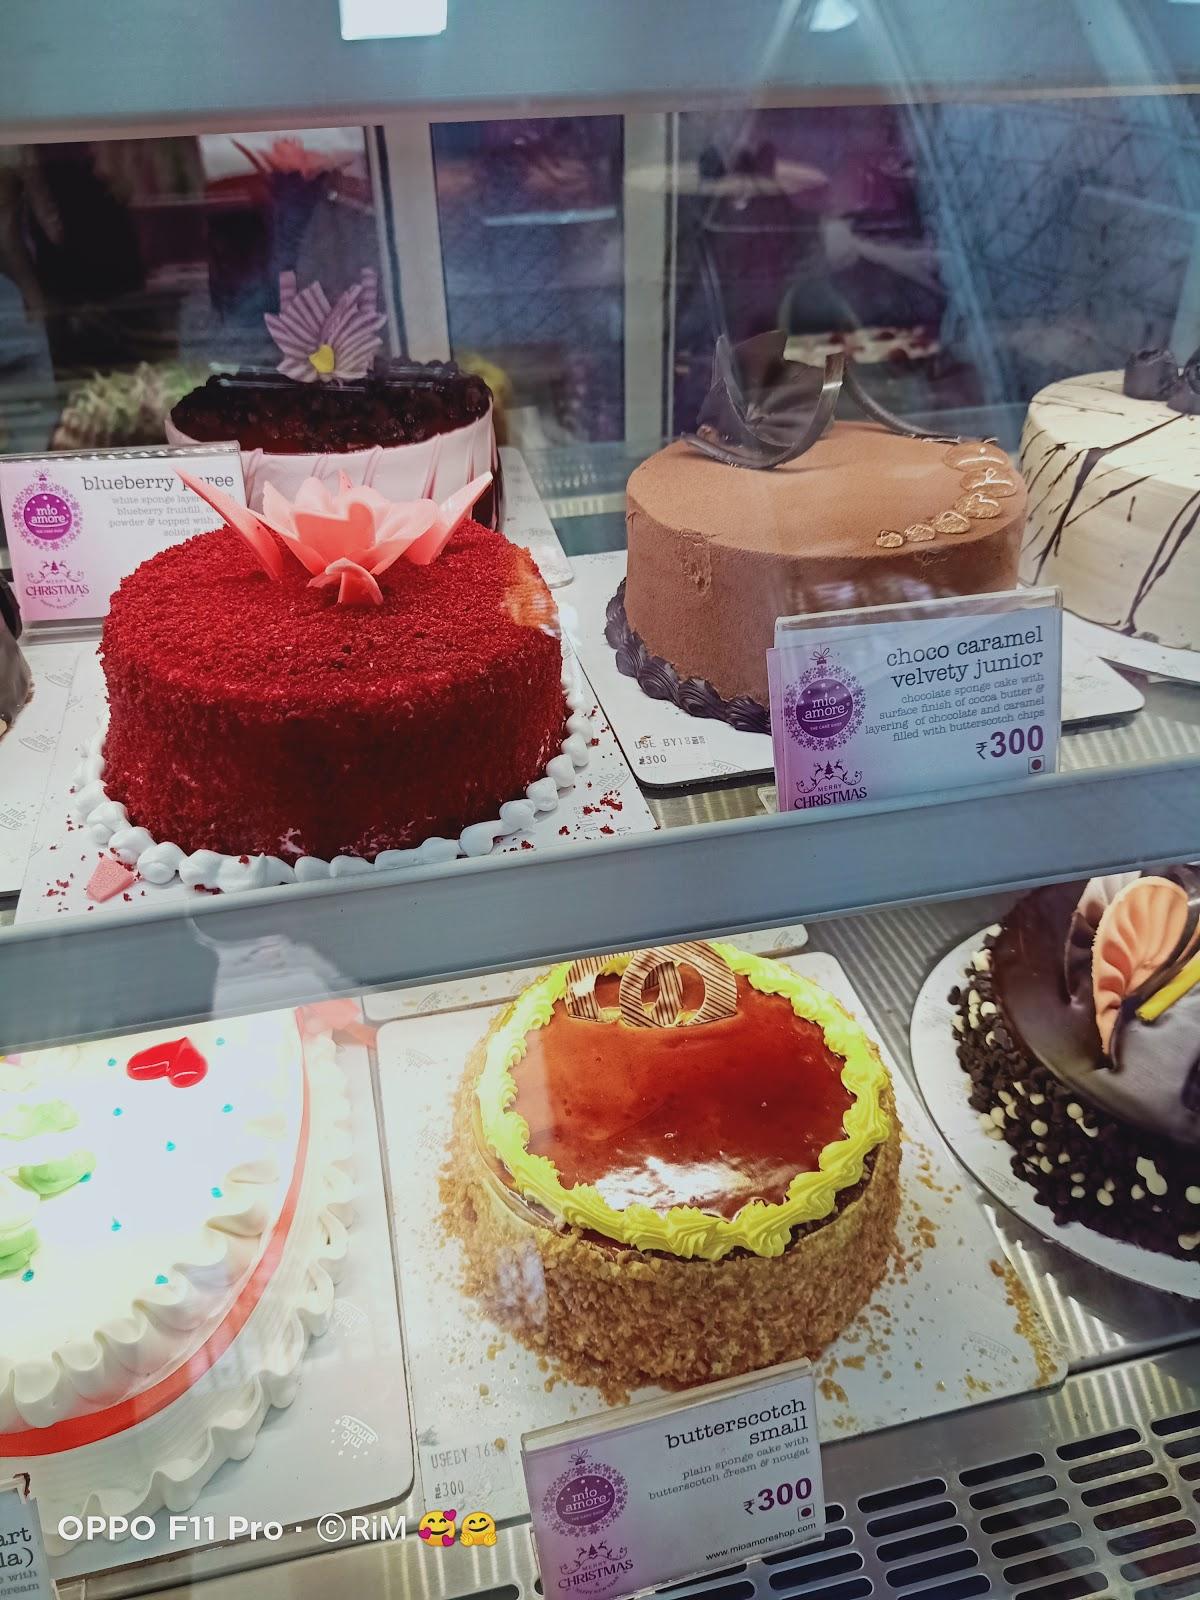 Mio Amore - The Cake Shop (@mioamore_bakery) • Instagram photos and videos